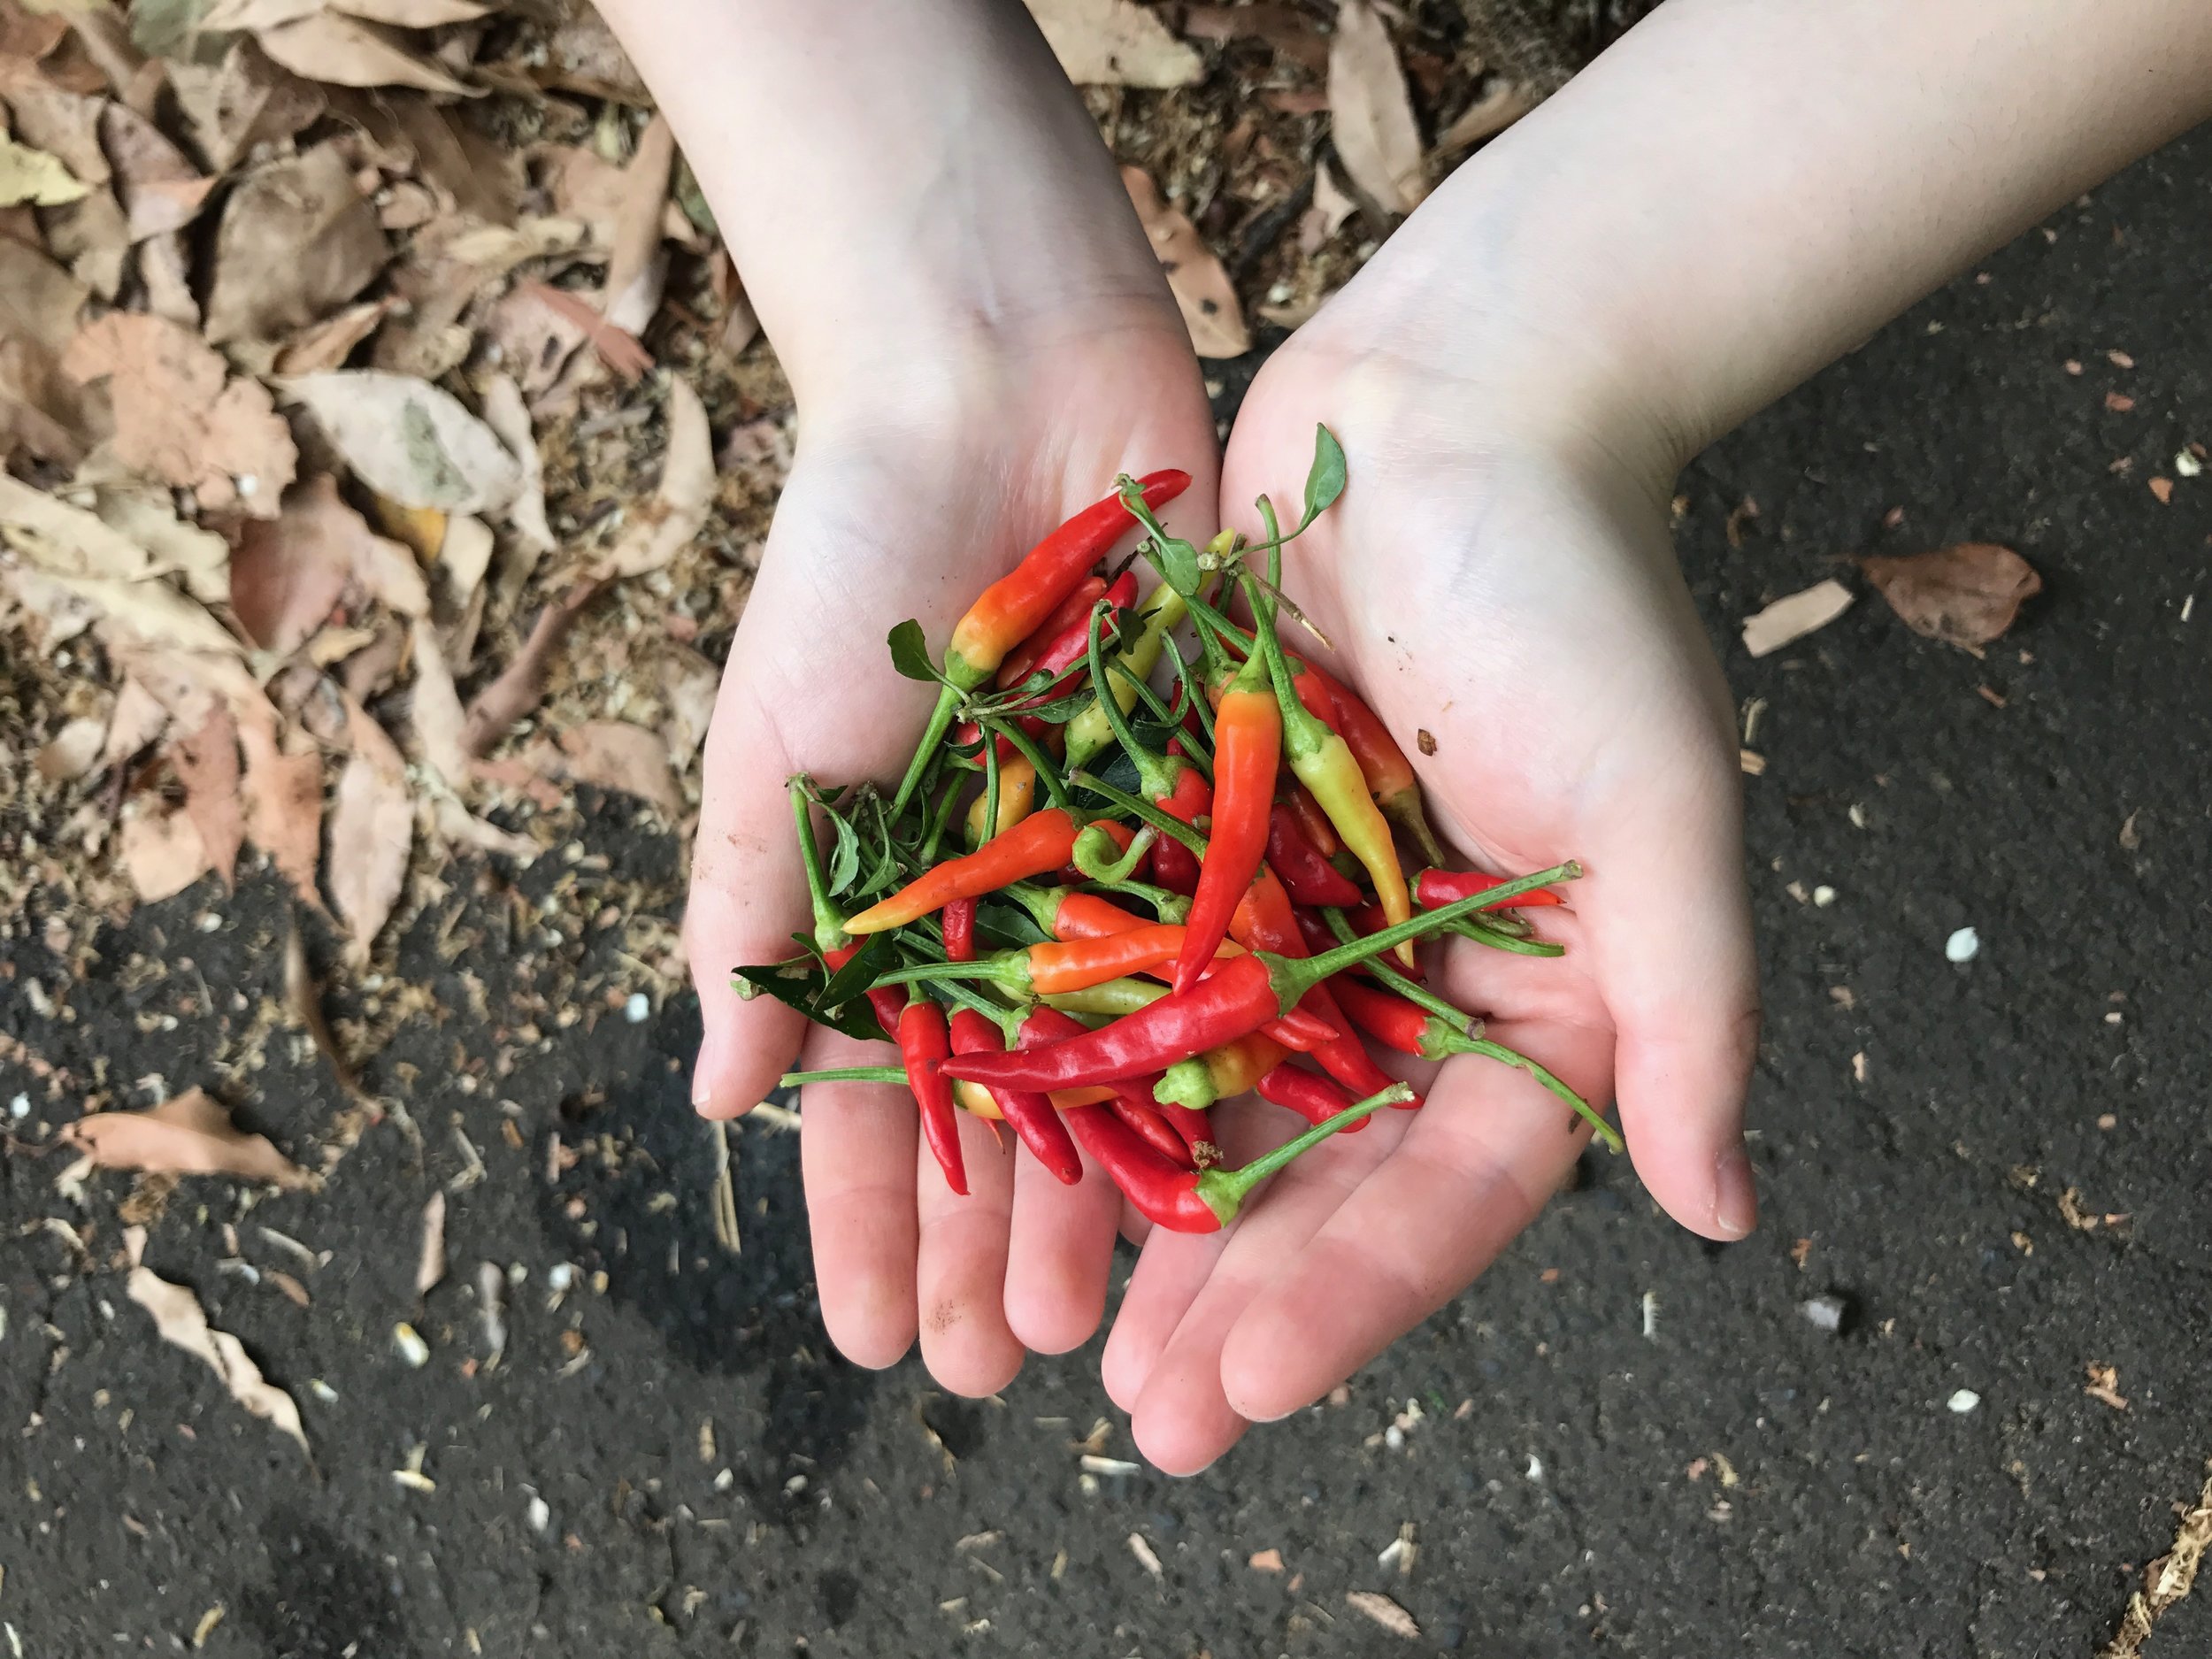 Harvesting Chili Peppers